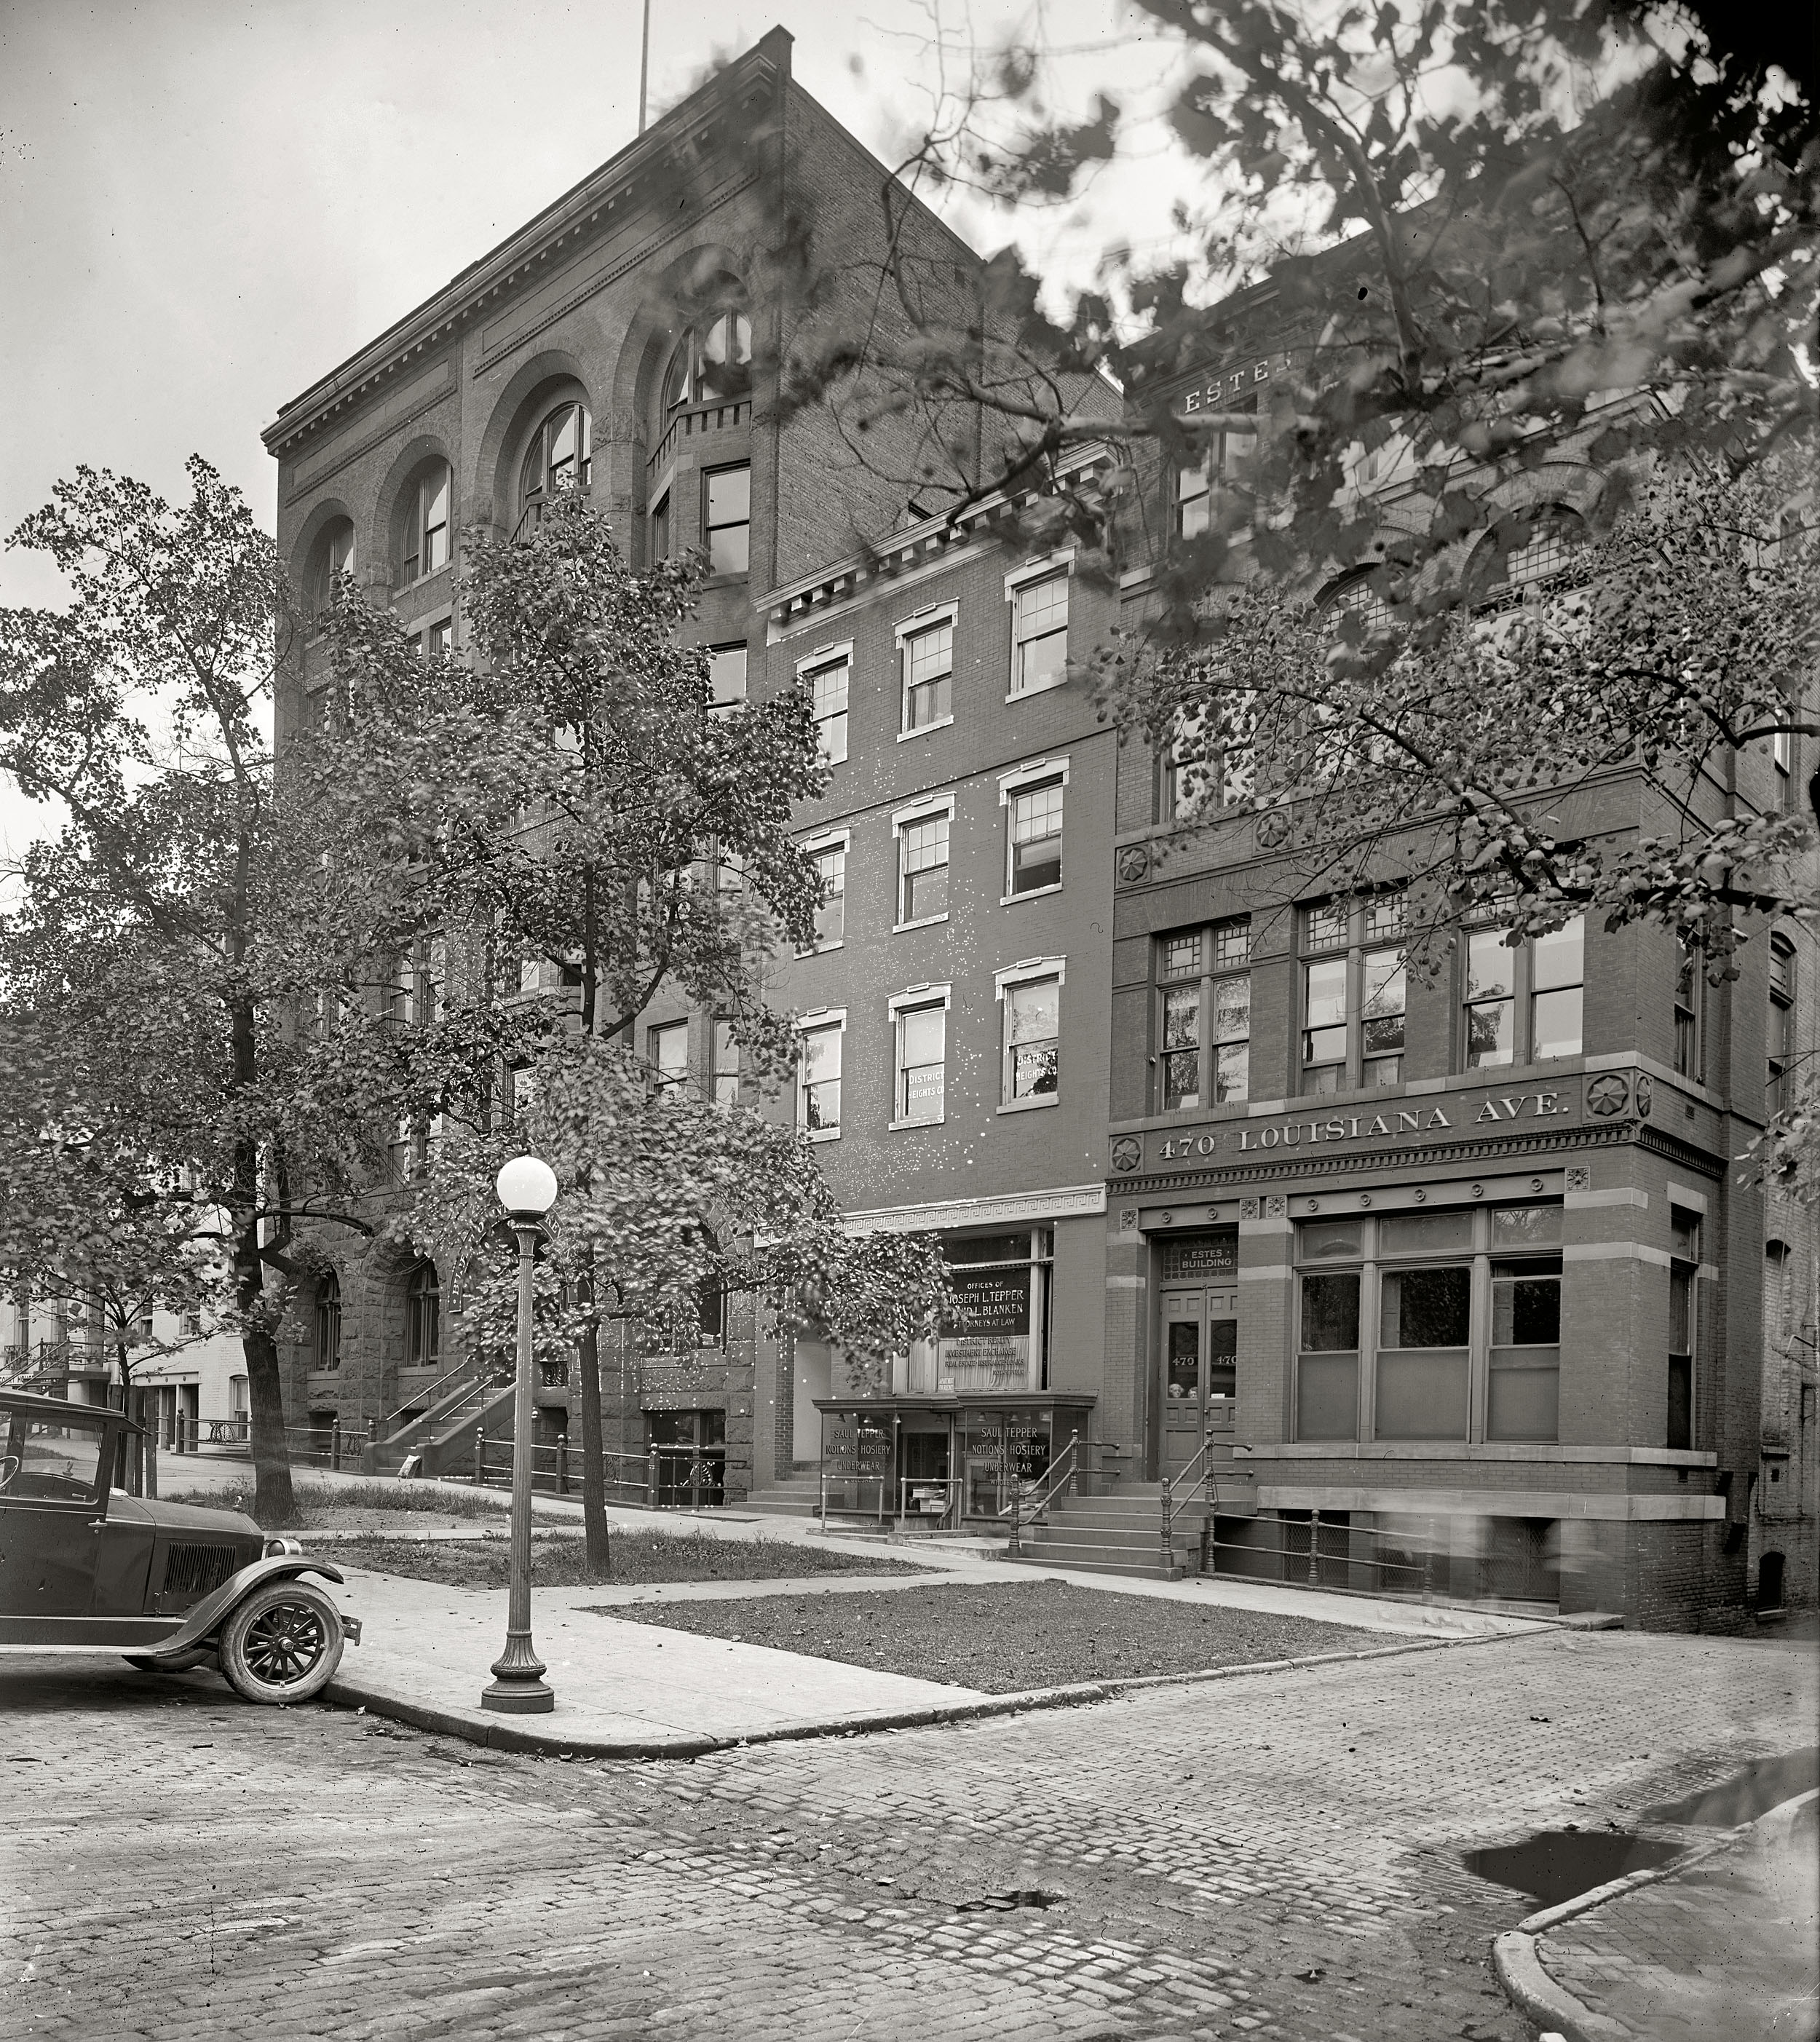 Washington circa 1925. "Tepper Building, Standard Engraving Co., 470 Louisiana Avenue N.W." The Tepper family business is what you might call vertically integrated: Joe's law practice upstairs, above Saul's "Notions, Hosiery, Underwear." National Photo Company Collection glass negative. View full size.